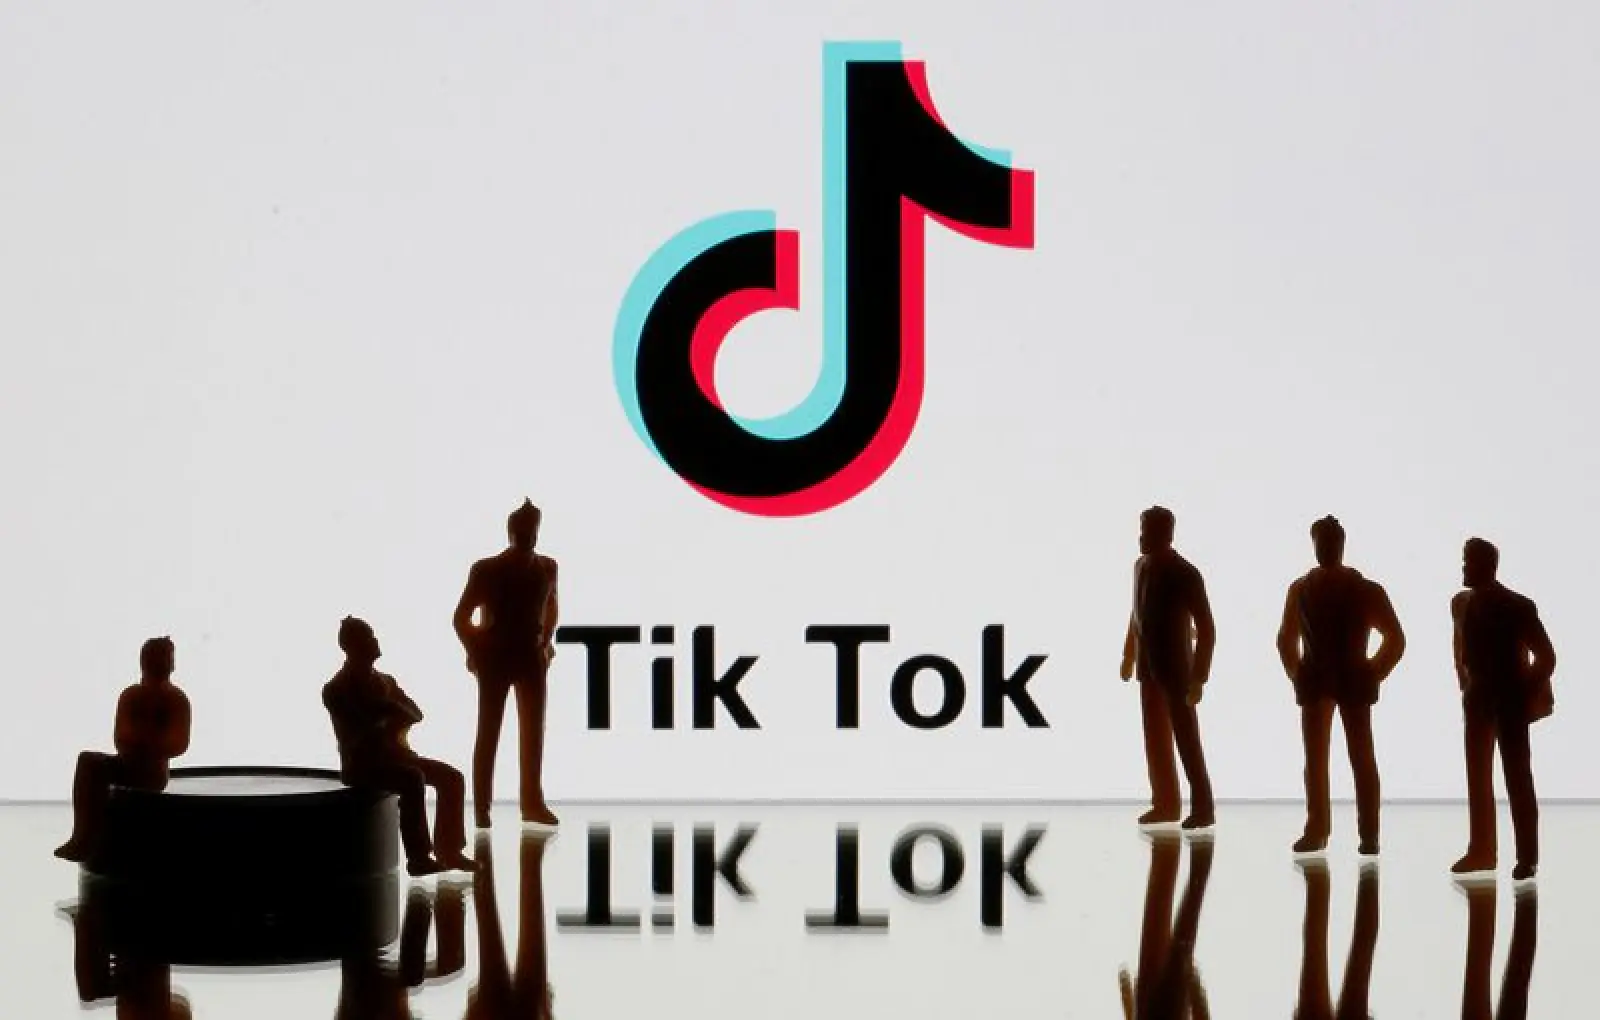 TikTok fired her after reporting sexual harassment, former female employee sued